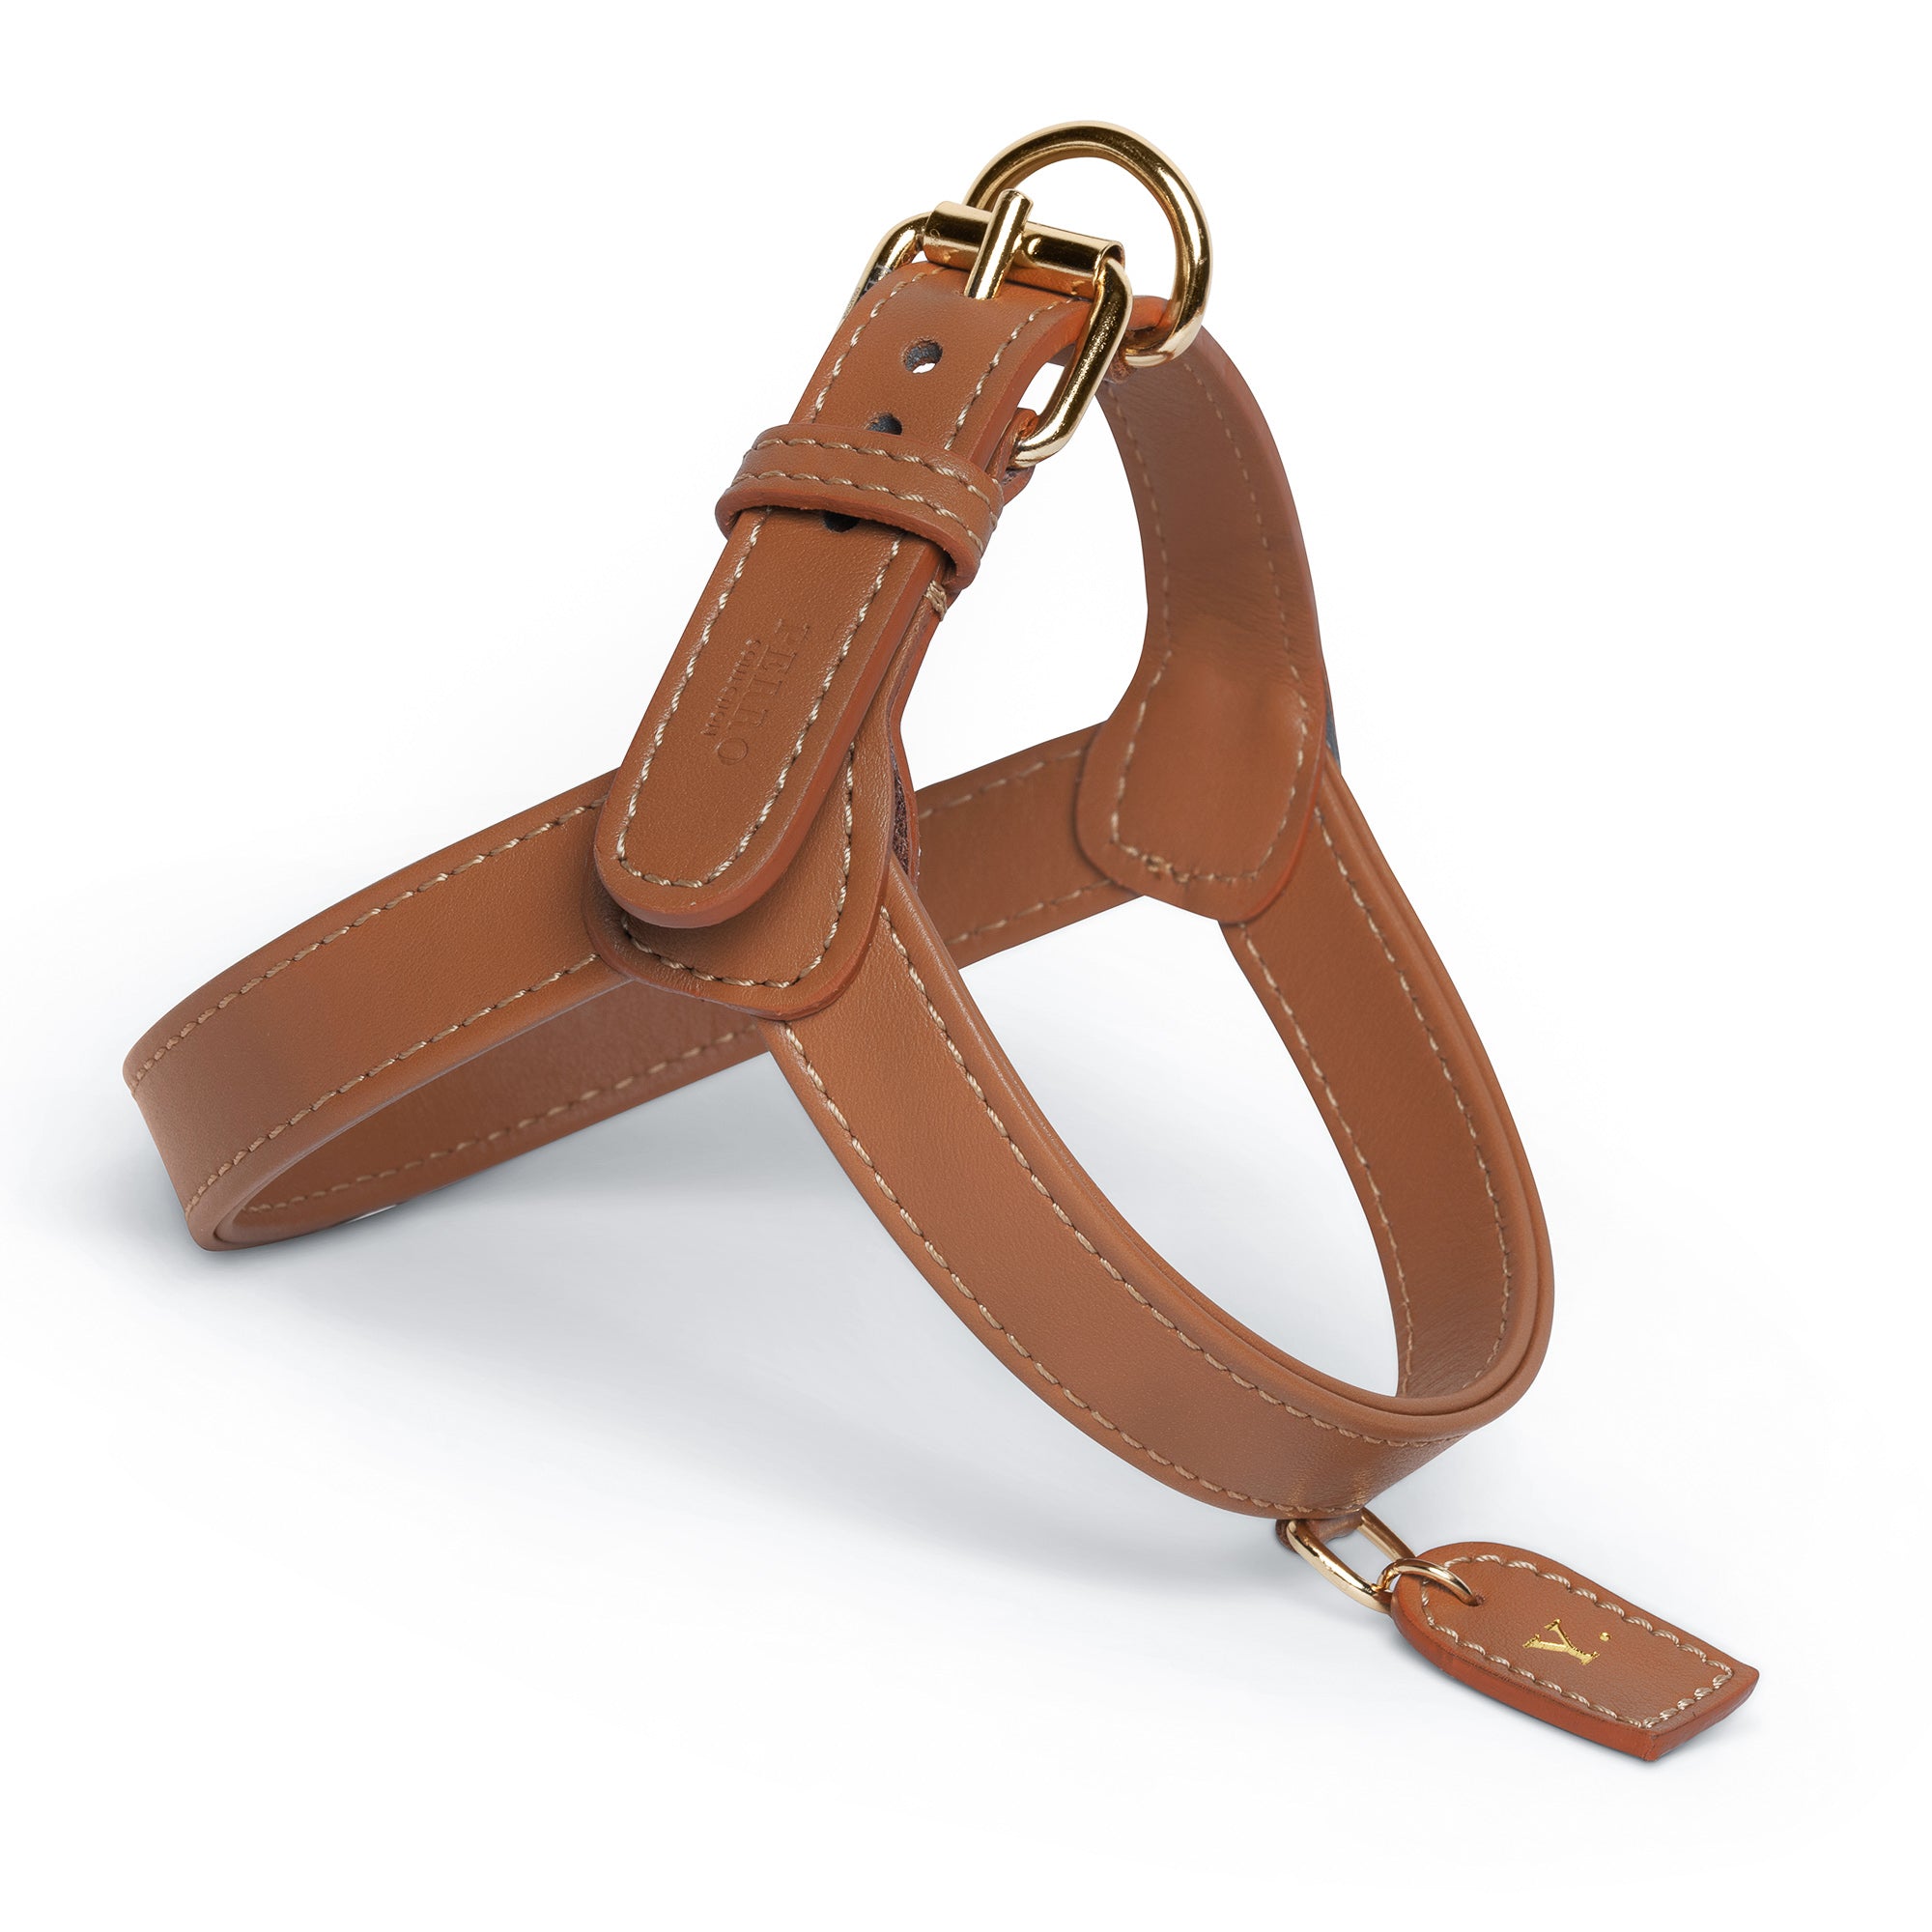 Caramel Harness - . Leather harness for dogs